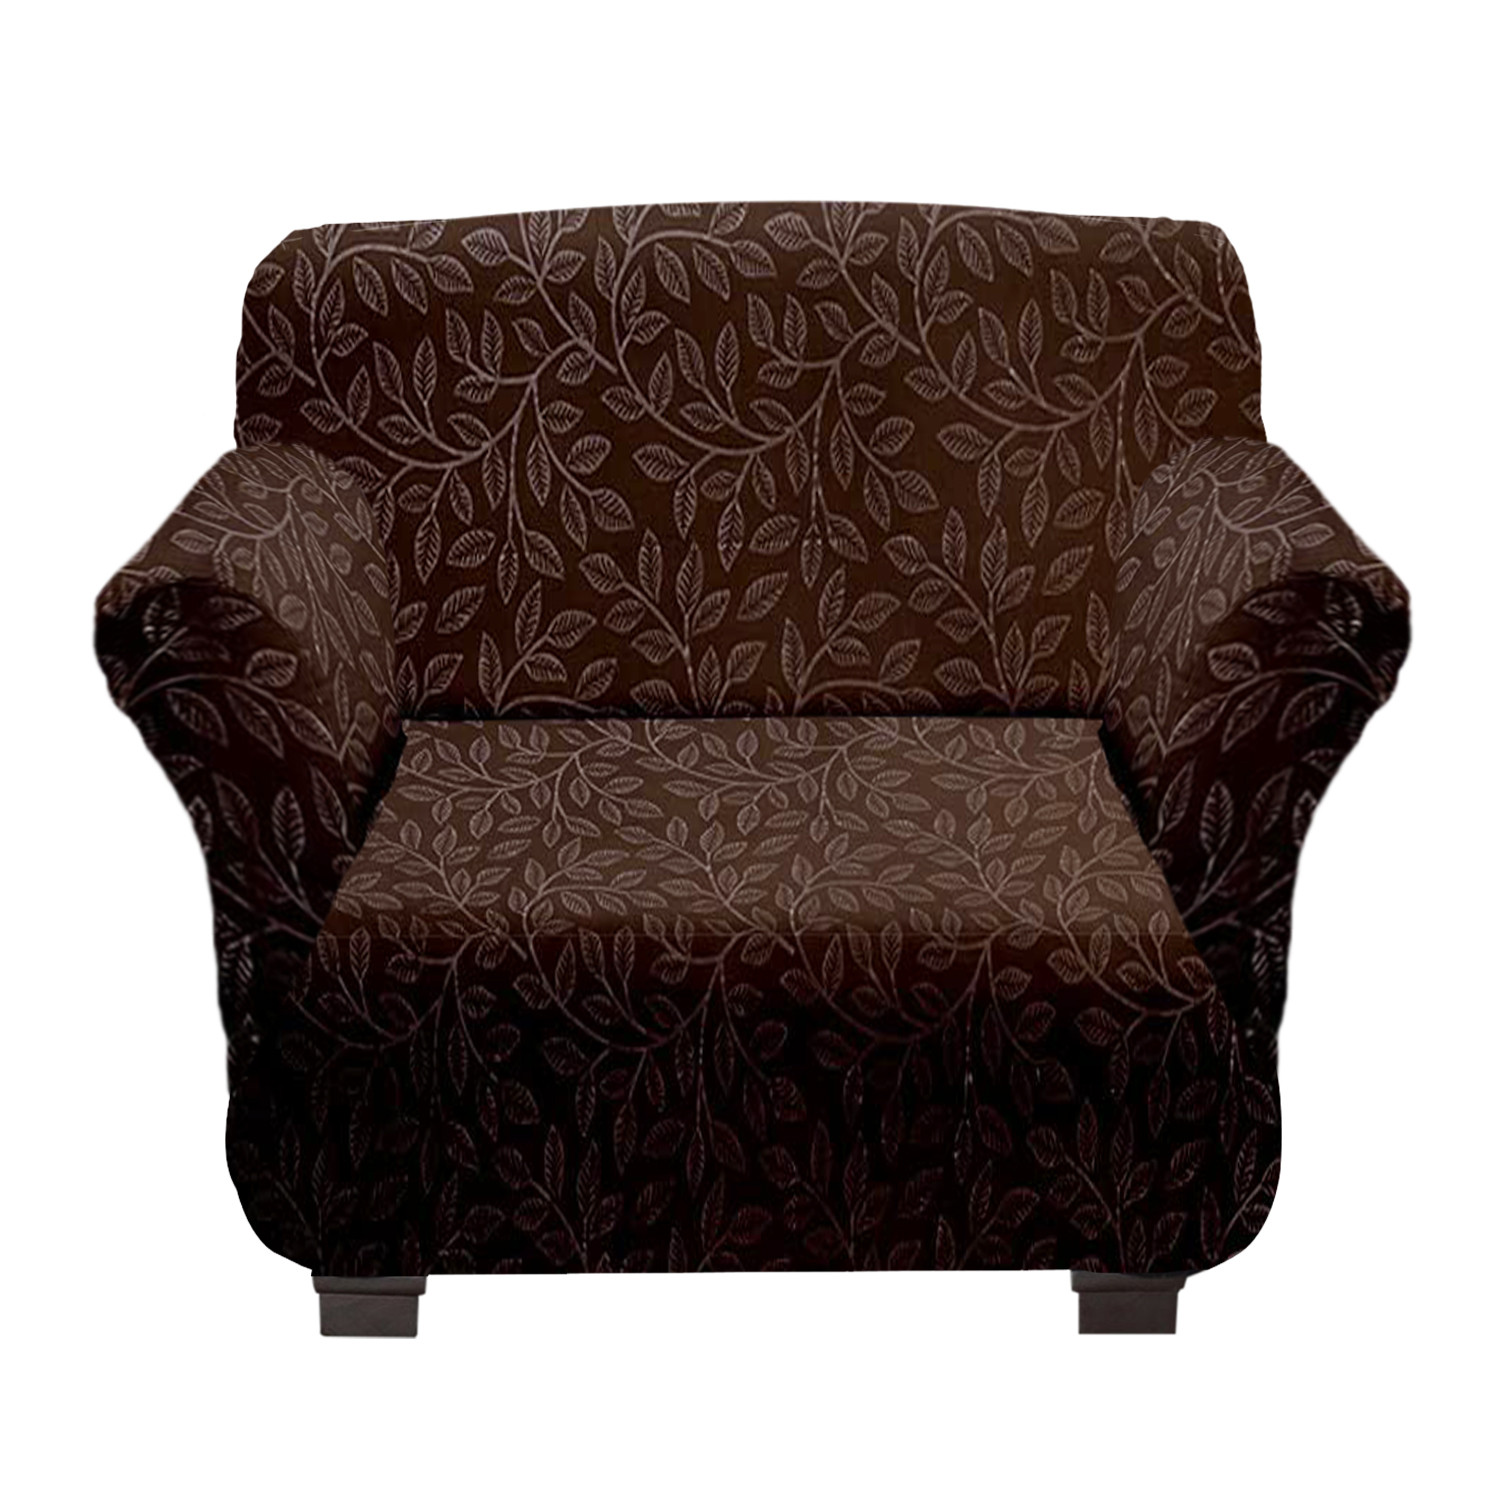 Kuber Industries Leaf Printed Stretchable, Non-Slip Polyster Single Seater Sofa Cover/Slipcover/Protector With Foam Stick (Brown)